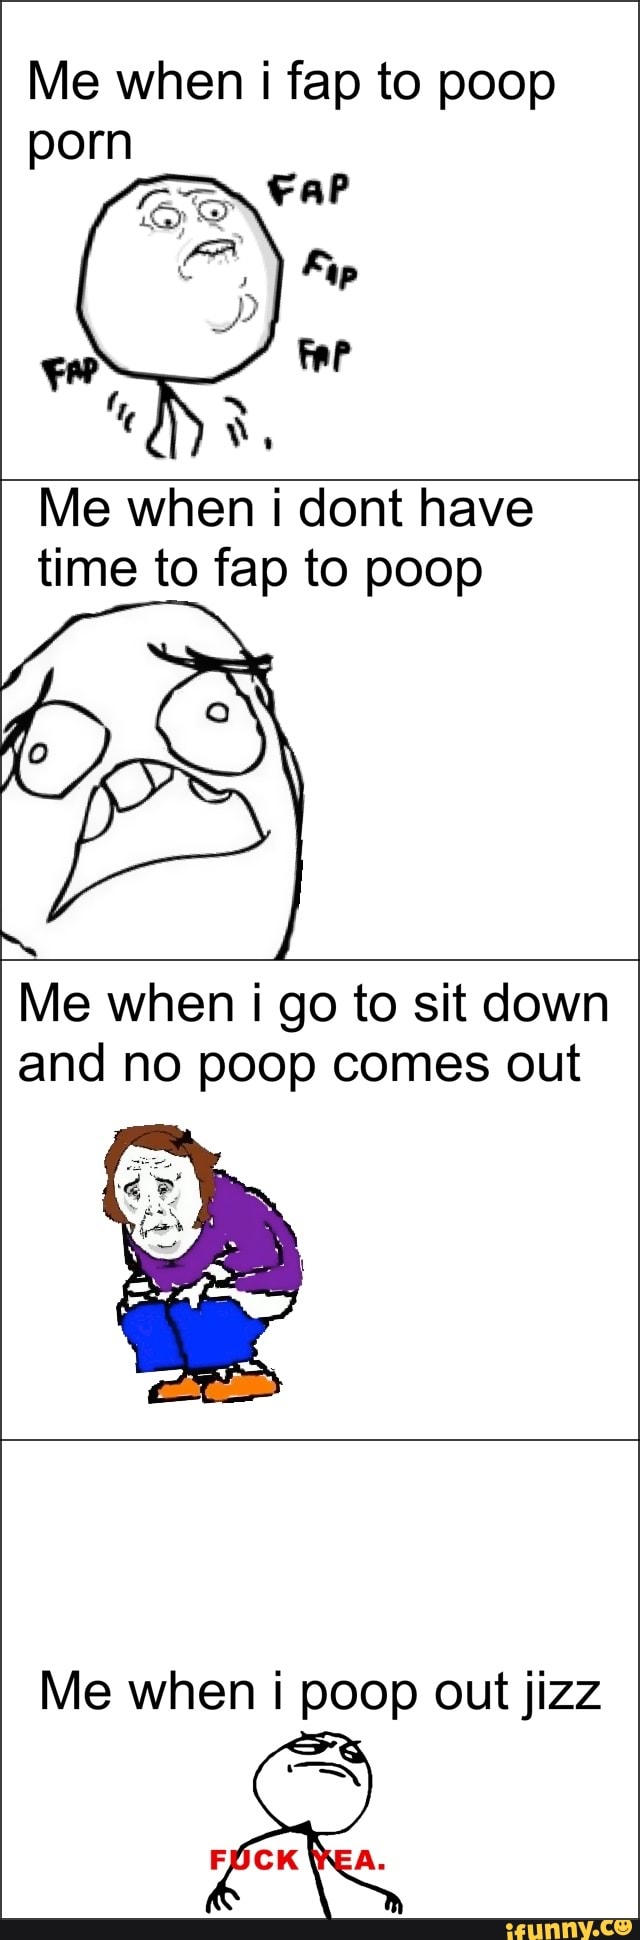 Poop Porn Fap - Me when i fap to poop porn Me when i dont have time to fap to poop Me when  i go to sit down and no poop comes out - iFunny :)